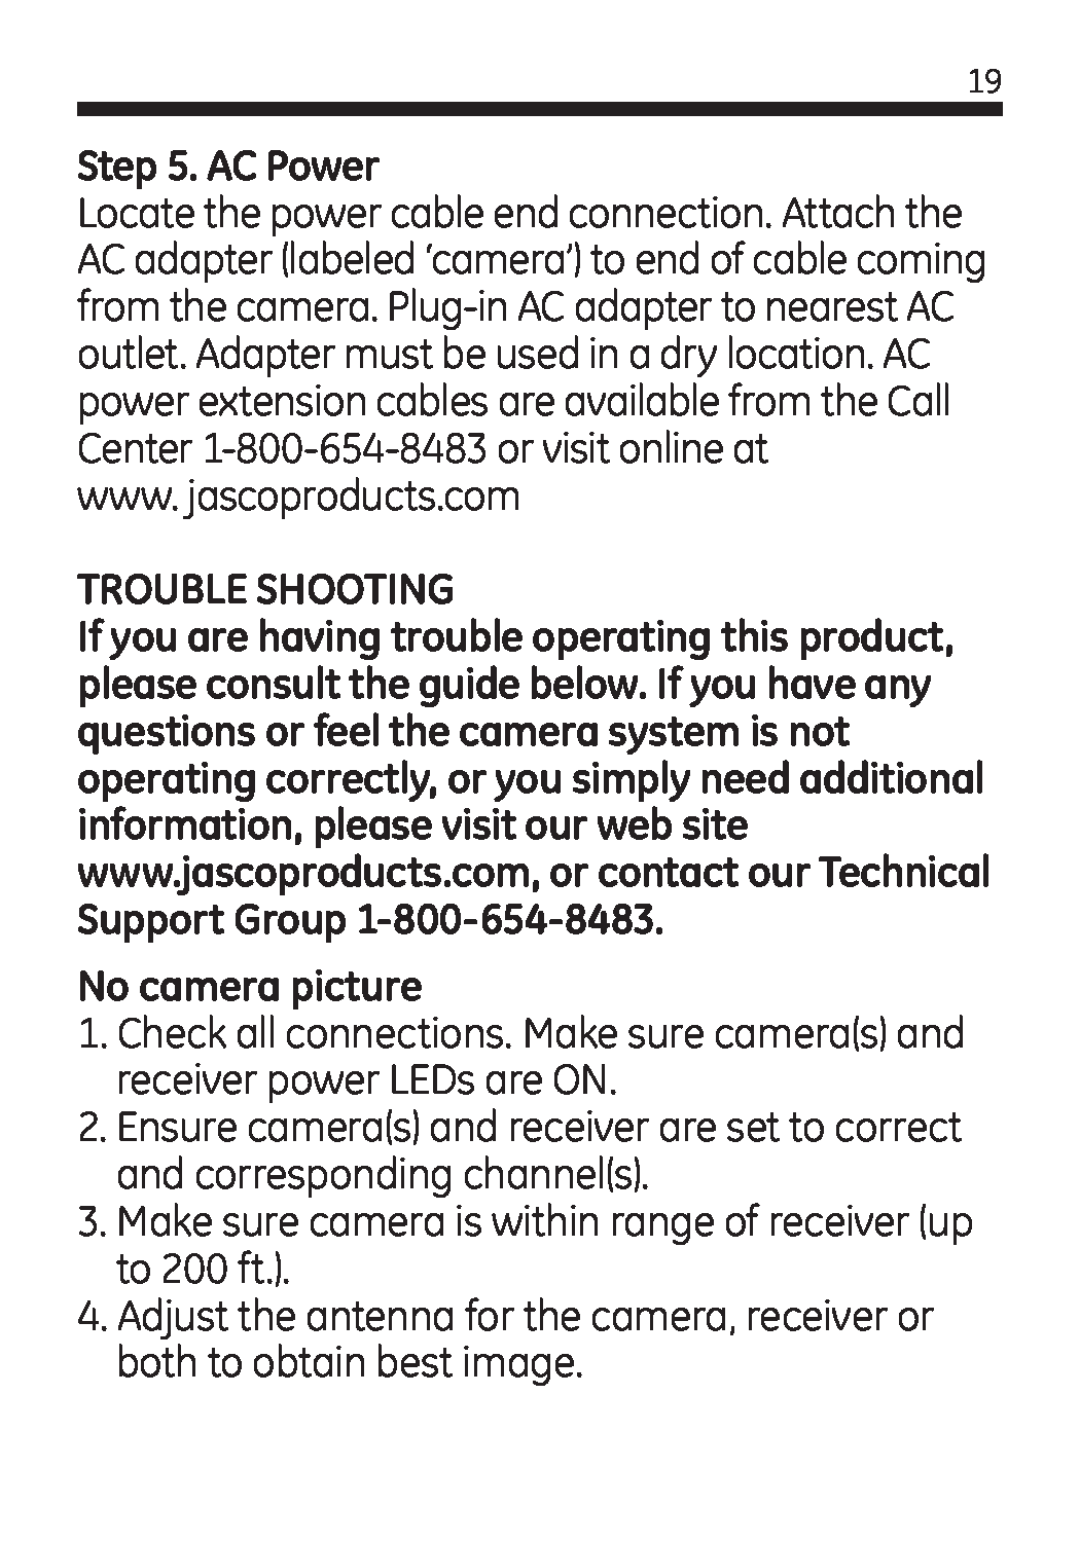 Jasco 45246 user manual AC Power, Trouble Shooting, No camera picture 